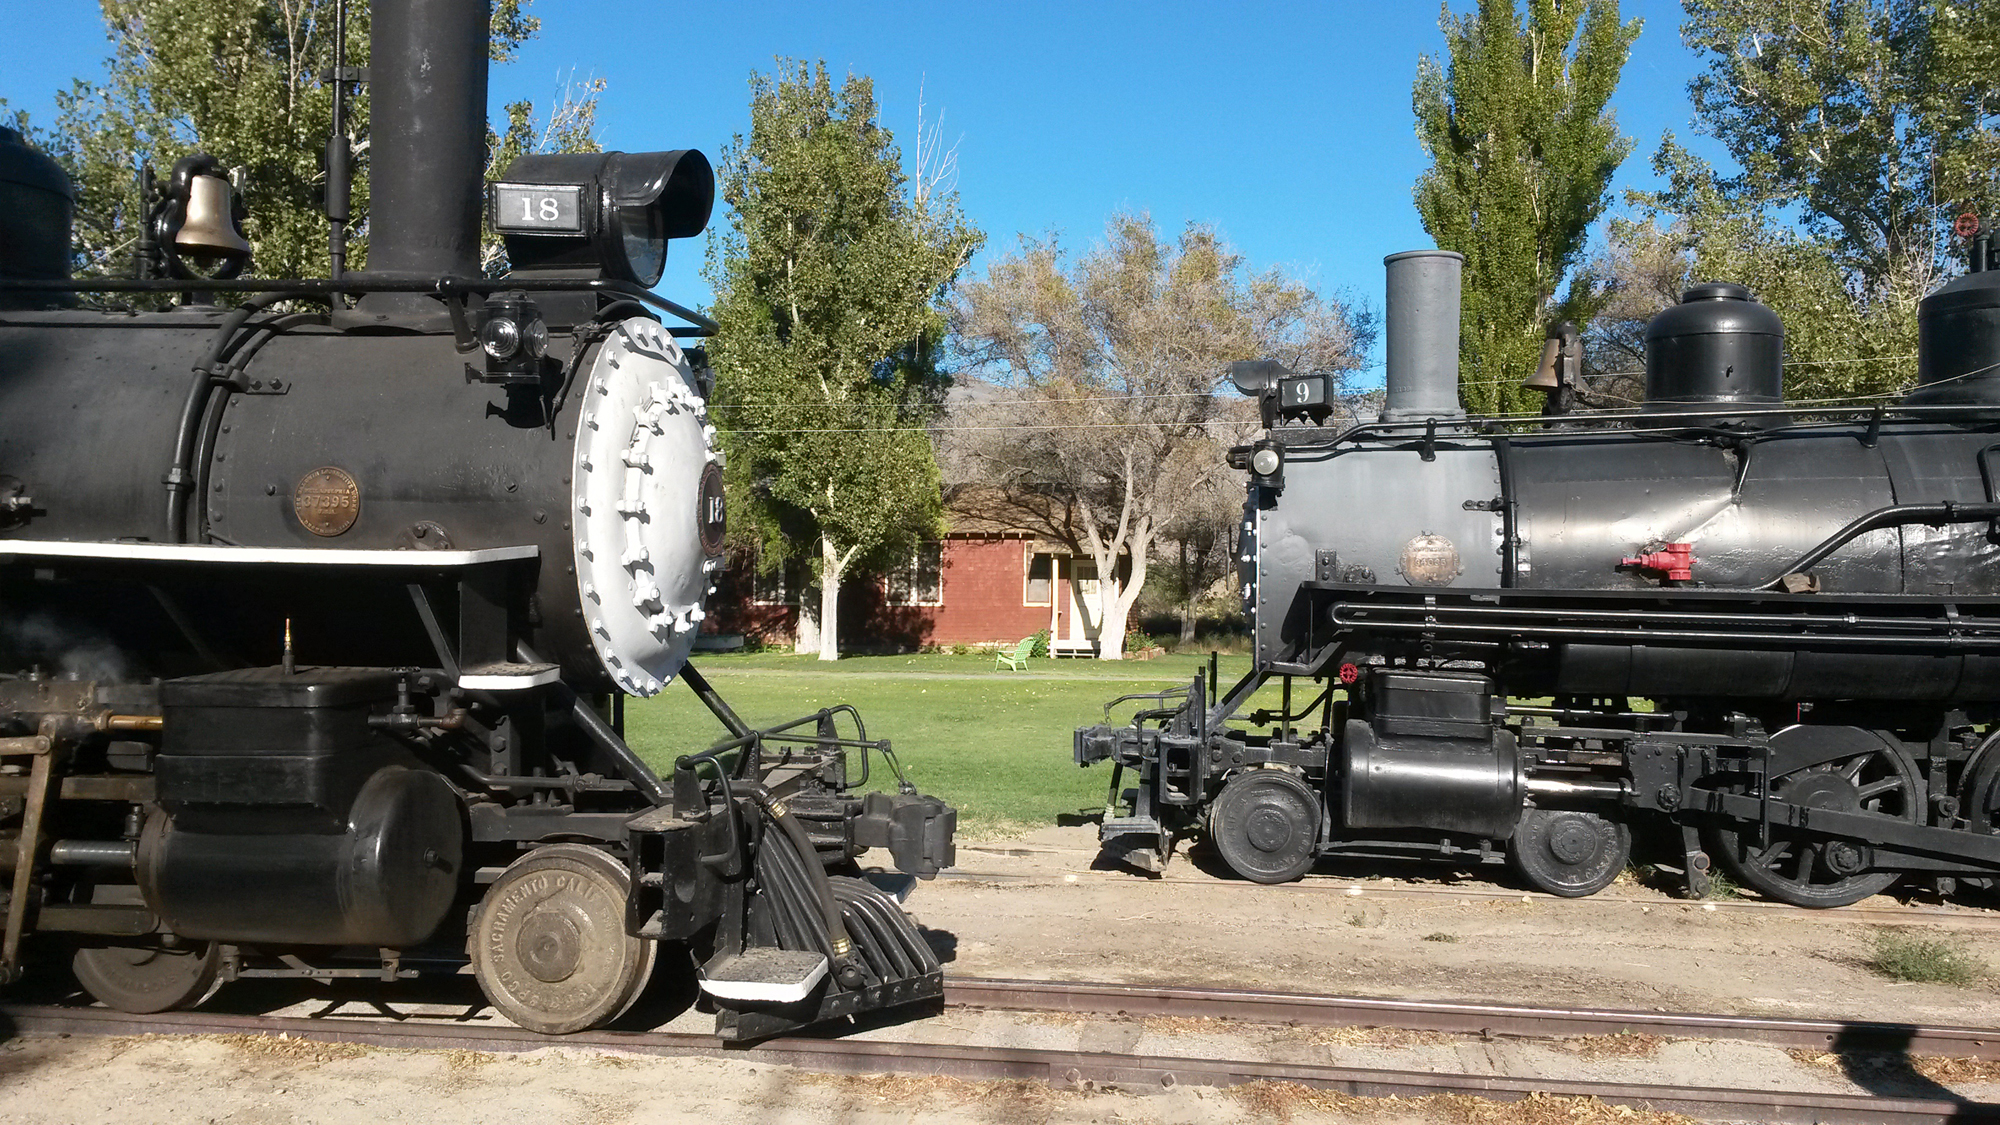 Southern Pacific #18 – December 2022 and January 2023 – Carson